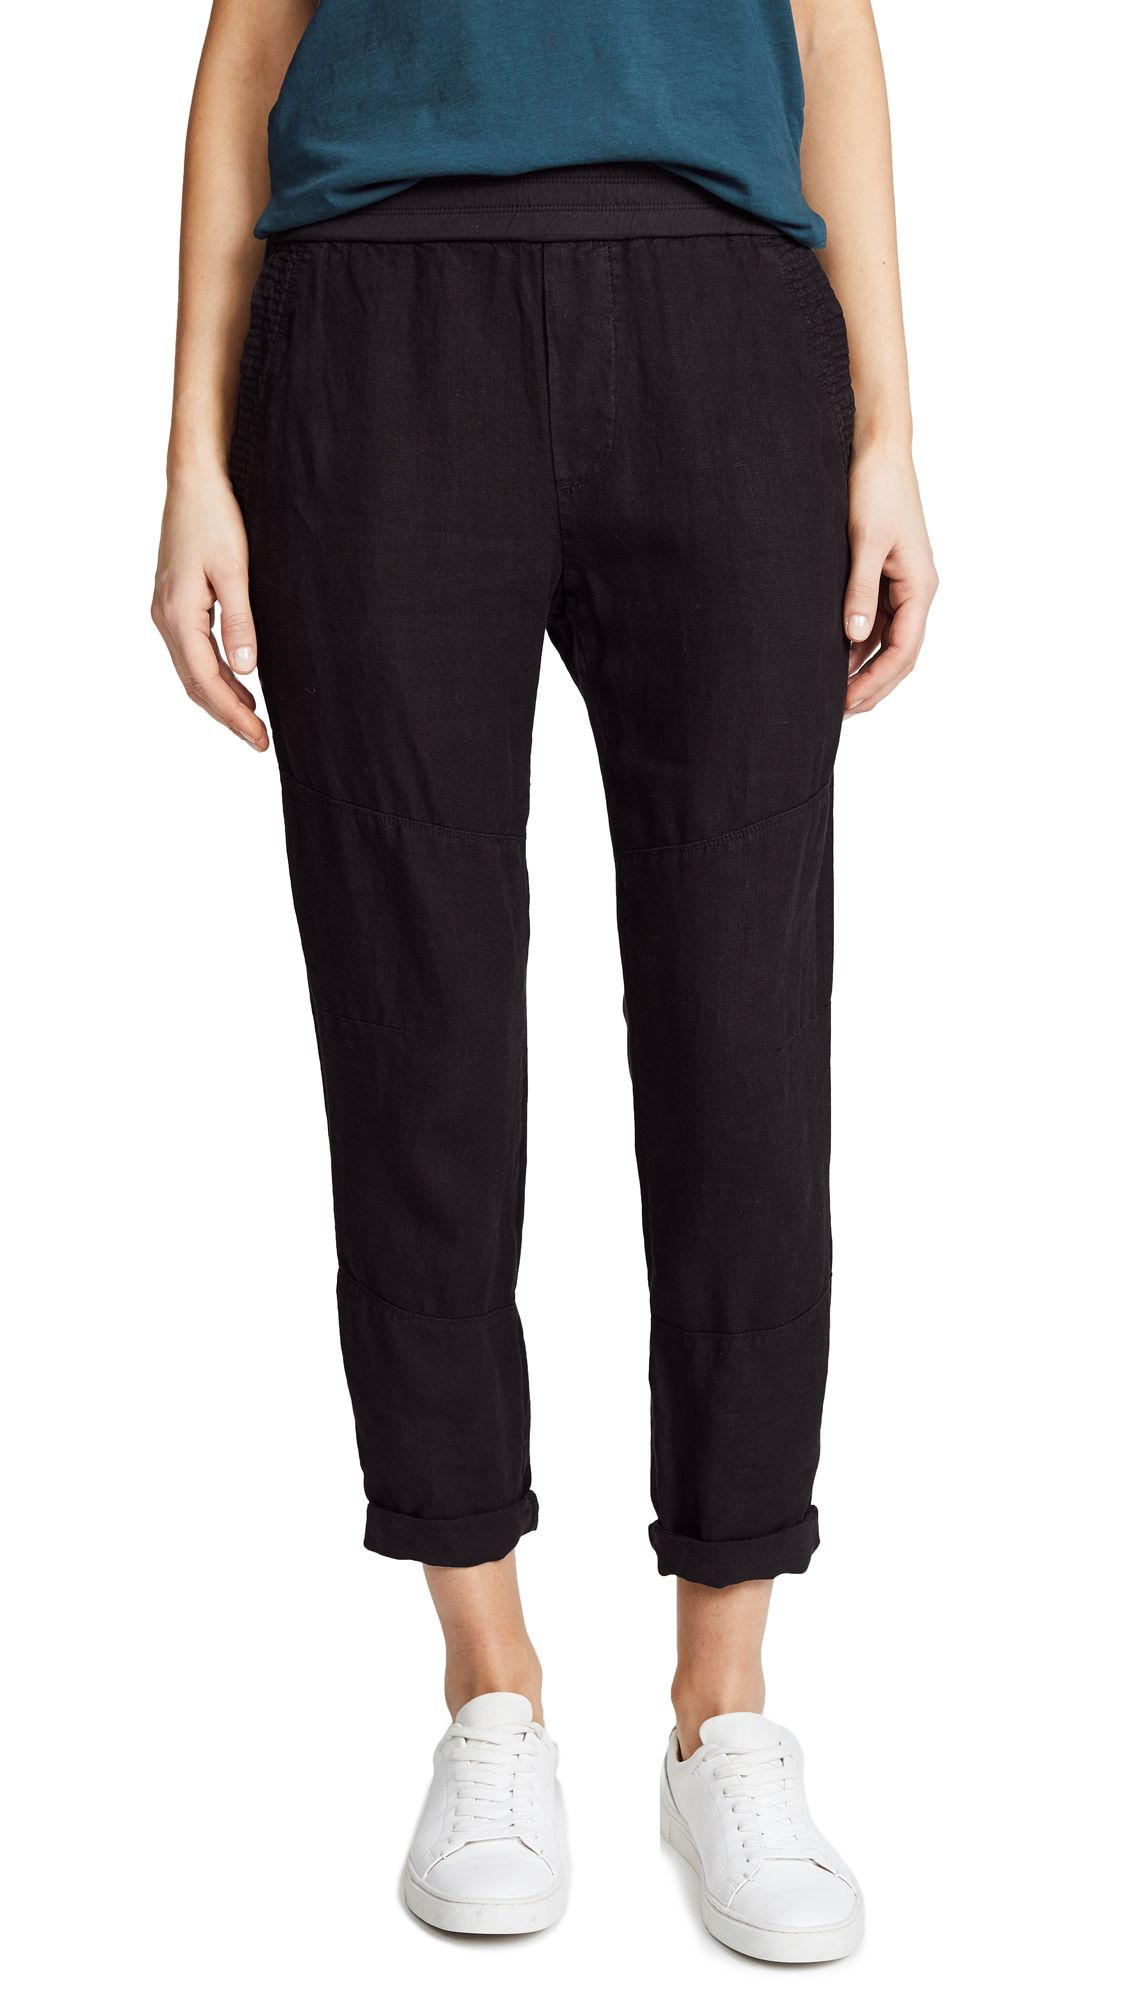 James Perse Patched Pull On Pants | Shopbop